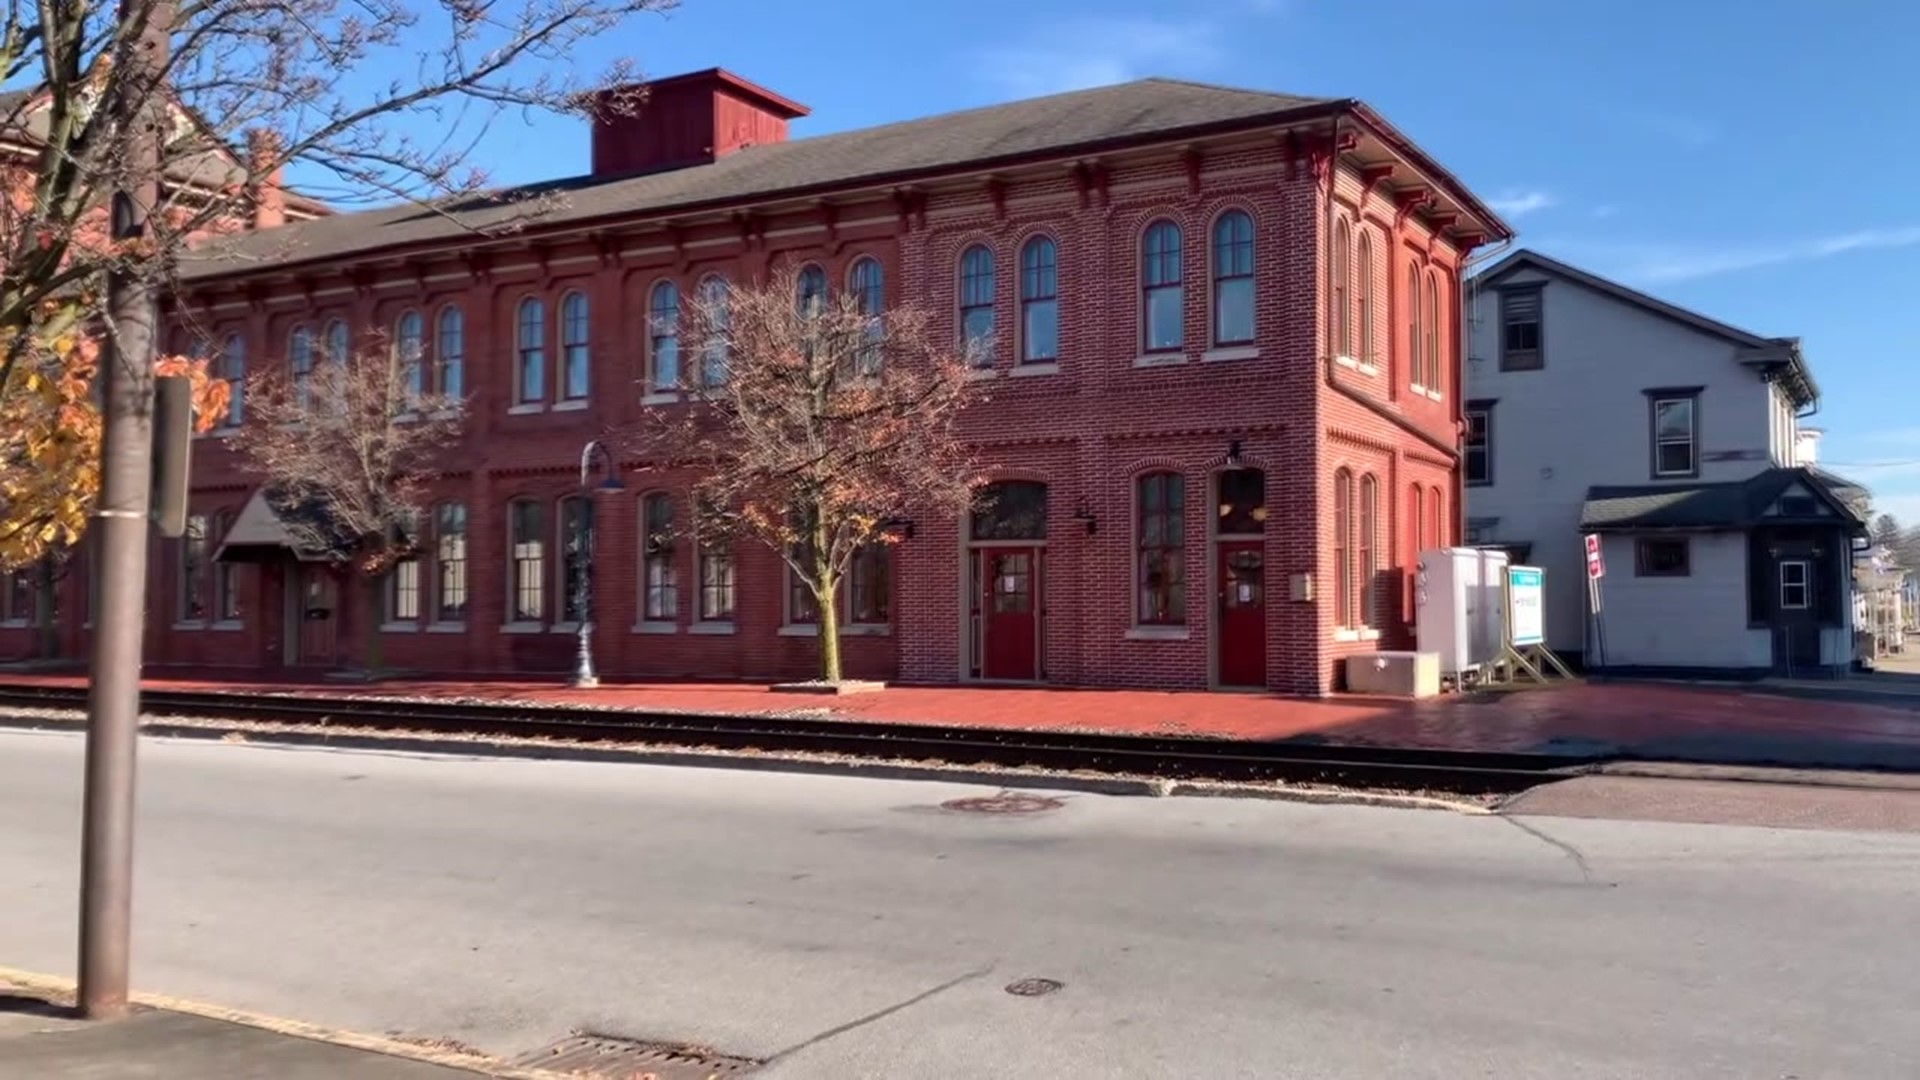 Formally a passenger train station, Sunbury Station is a marketplace that is home to a variety of antiques, railroad memorabilia, and craft vendors.